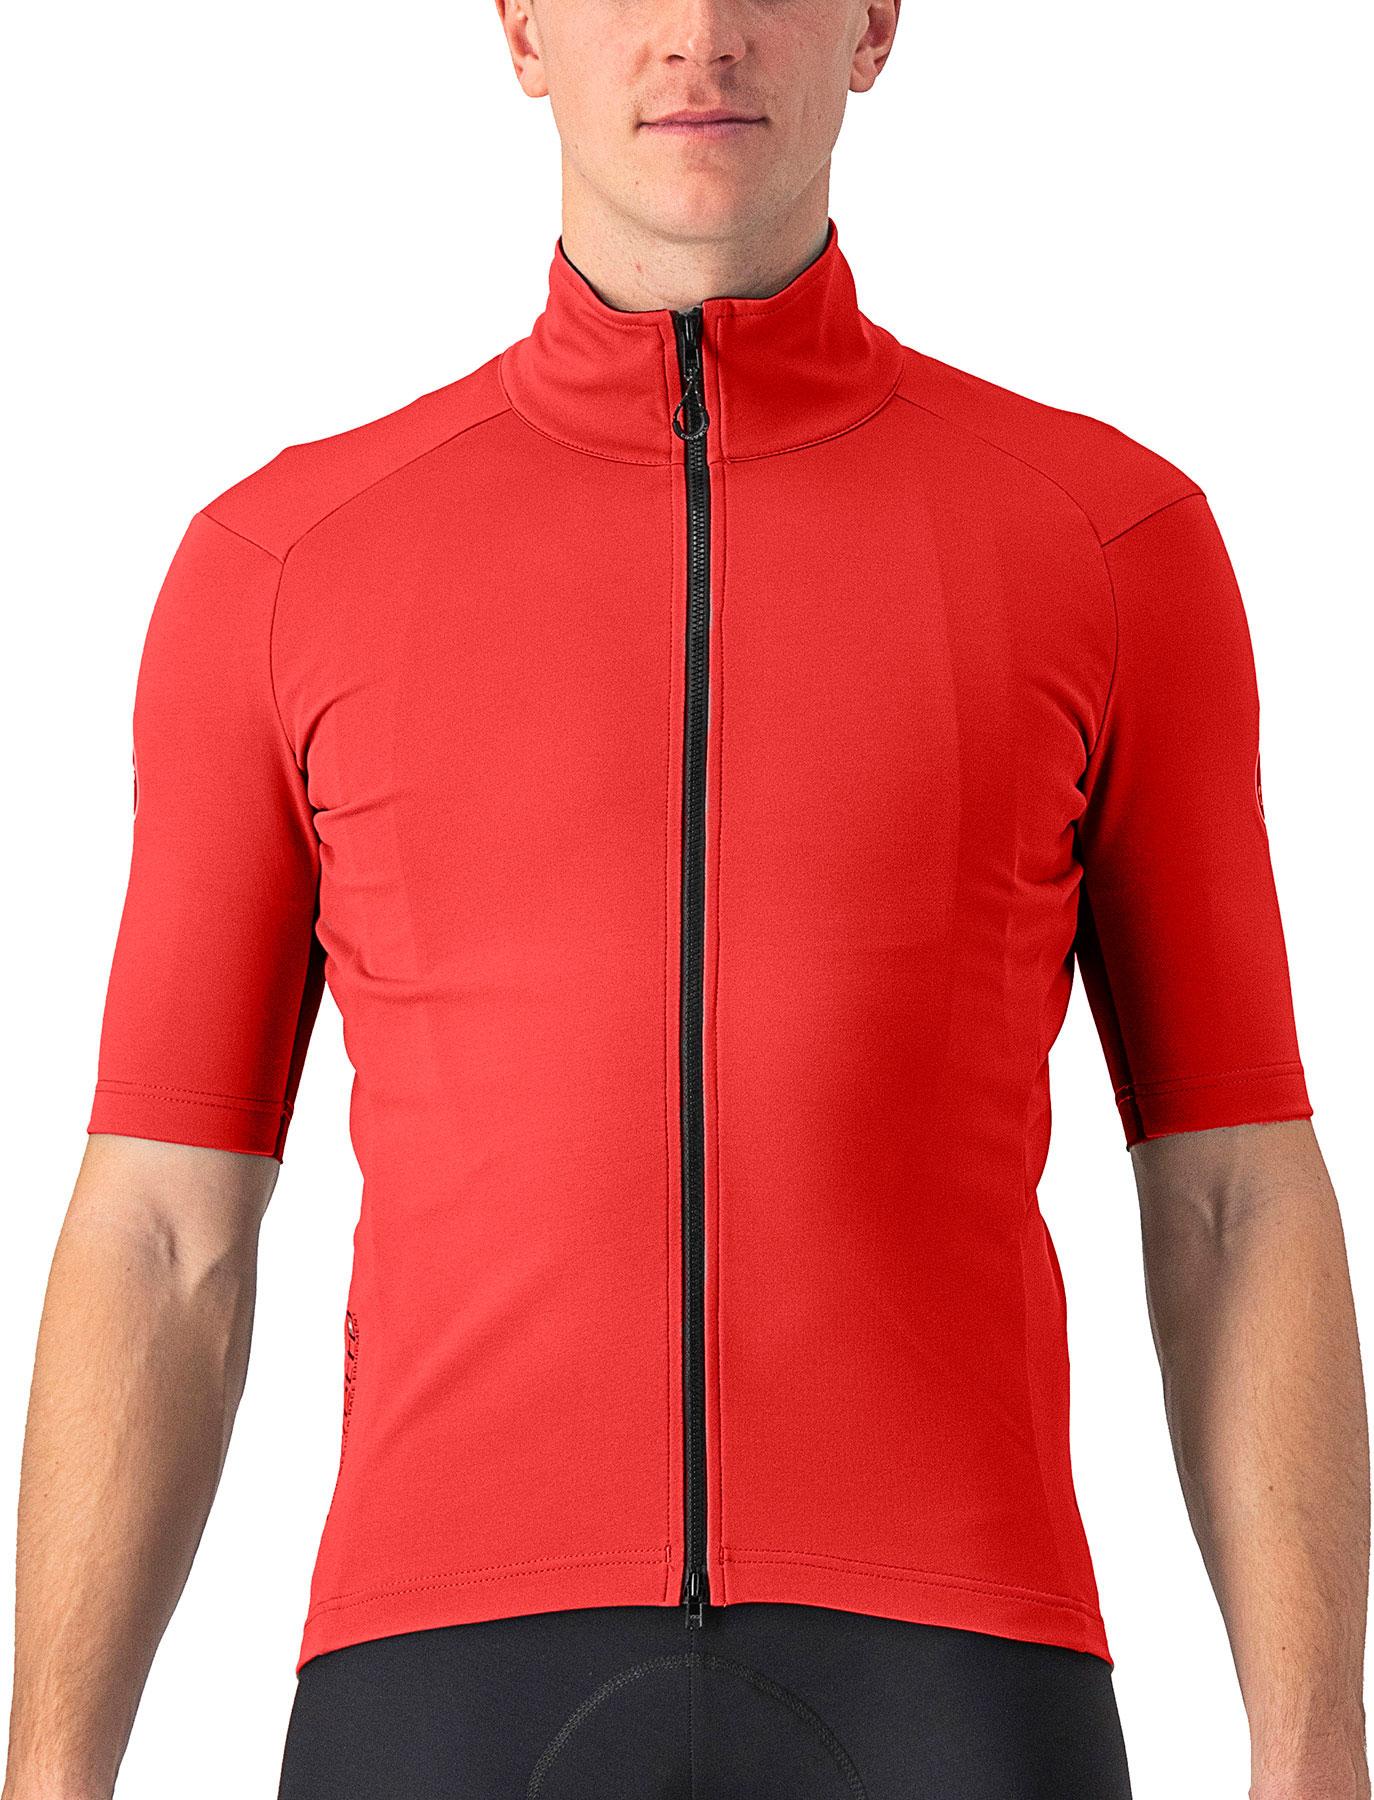 Castelli Perfetto Ros 2 Wind Jersey - Pompeian Red